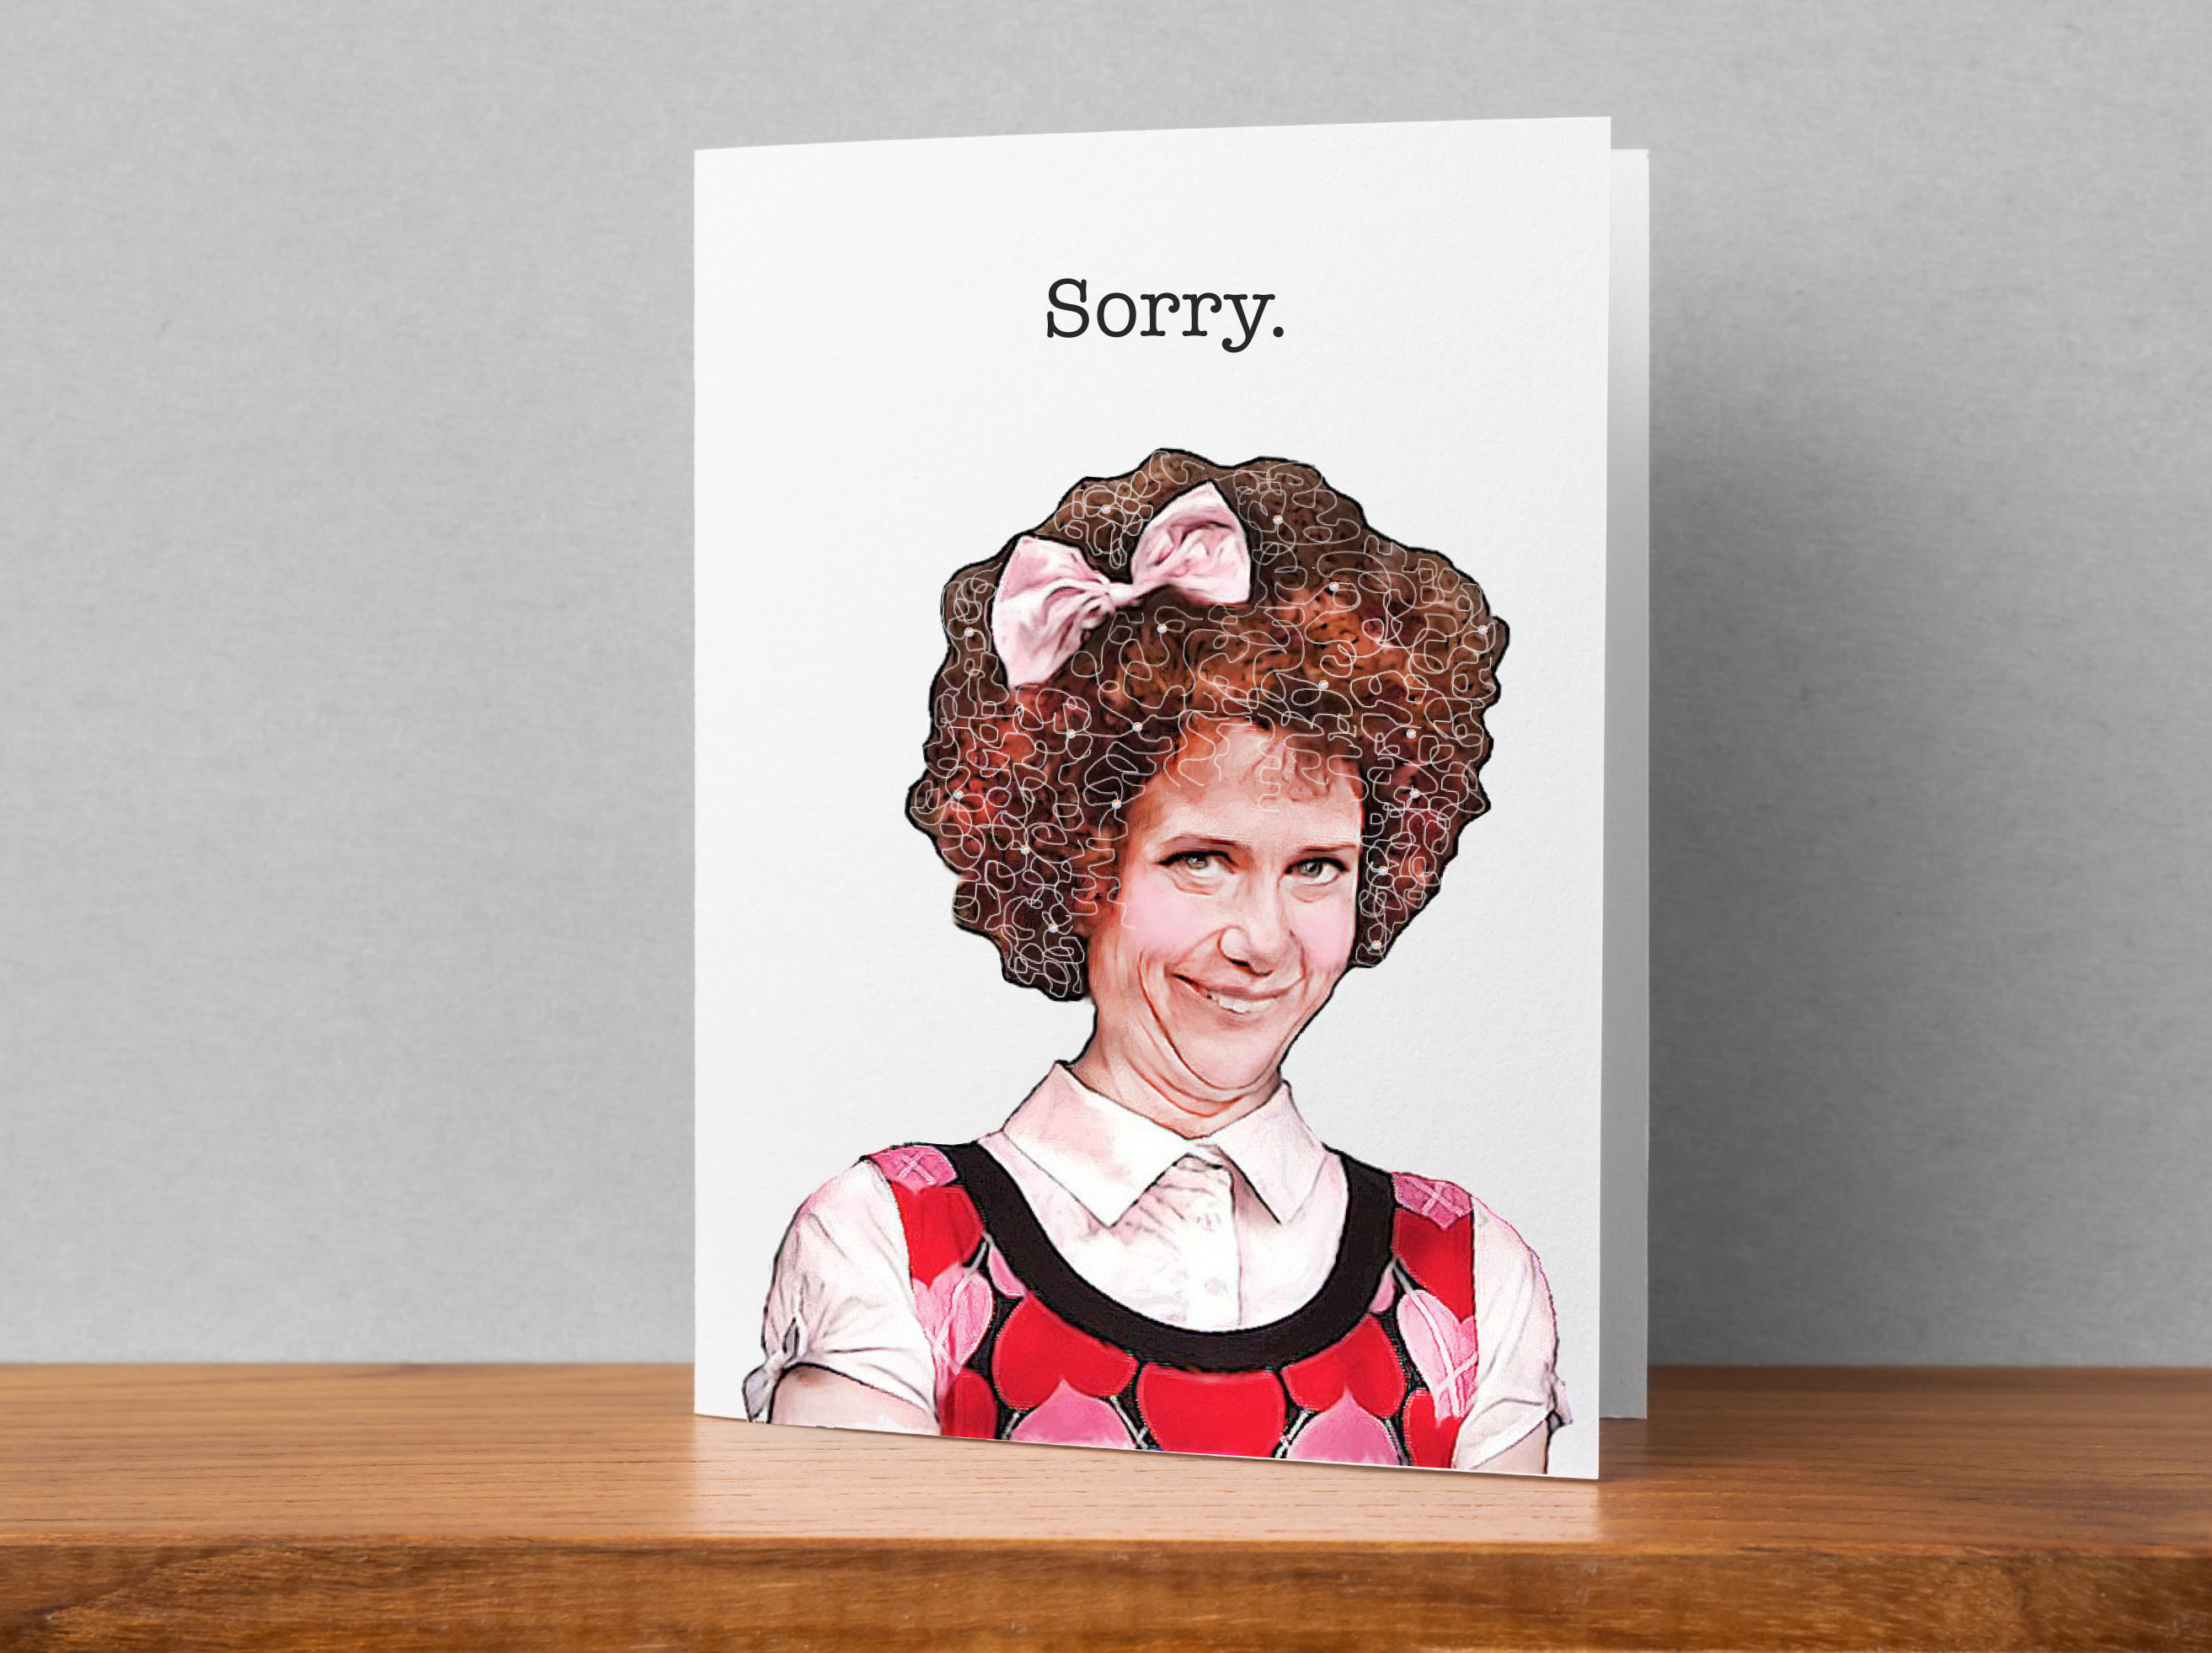 Gilly Did It and She's Sorry Original Greeting Card is Handmade in the USA,  Free Shipping Eligible 